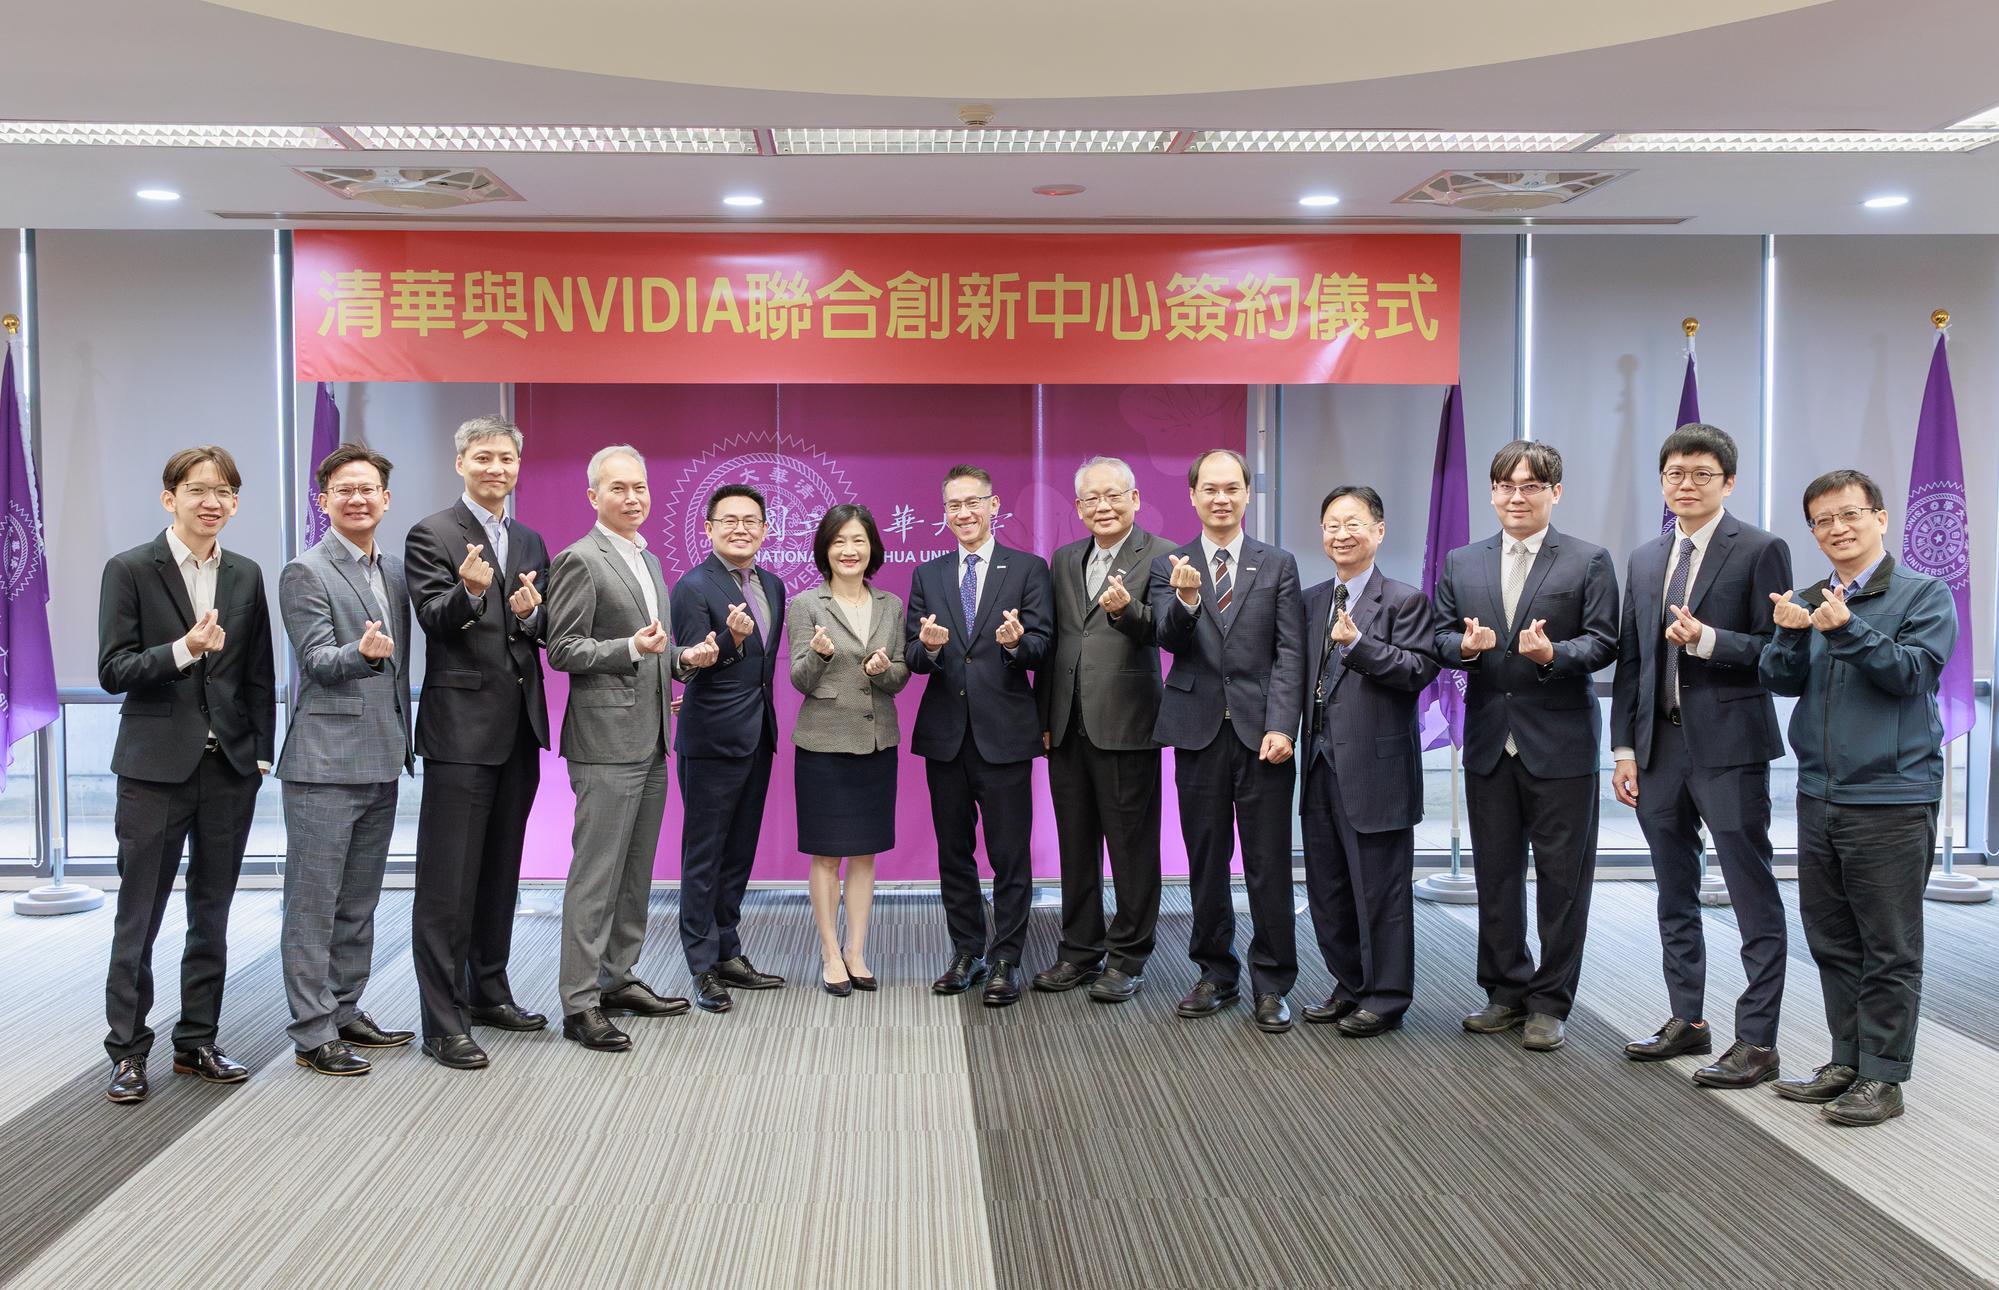 On November 13, NTHU and NVIDIA announced the establishment of the Innovation Center, aiming to promote comprehensive AI education and research innovation.